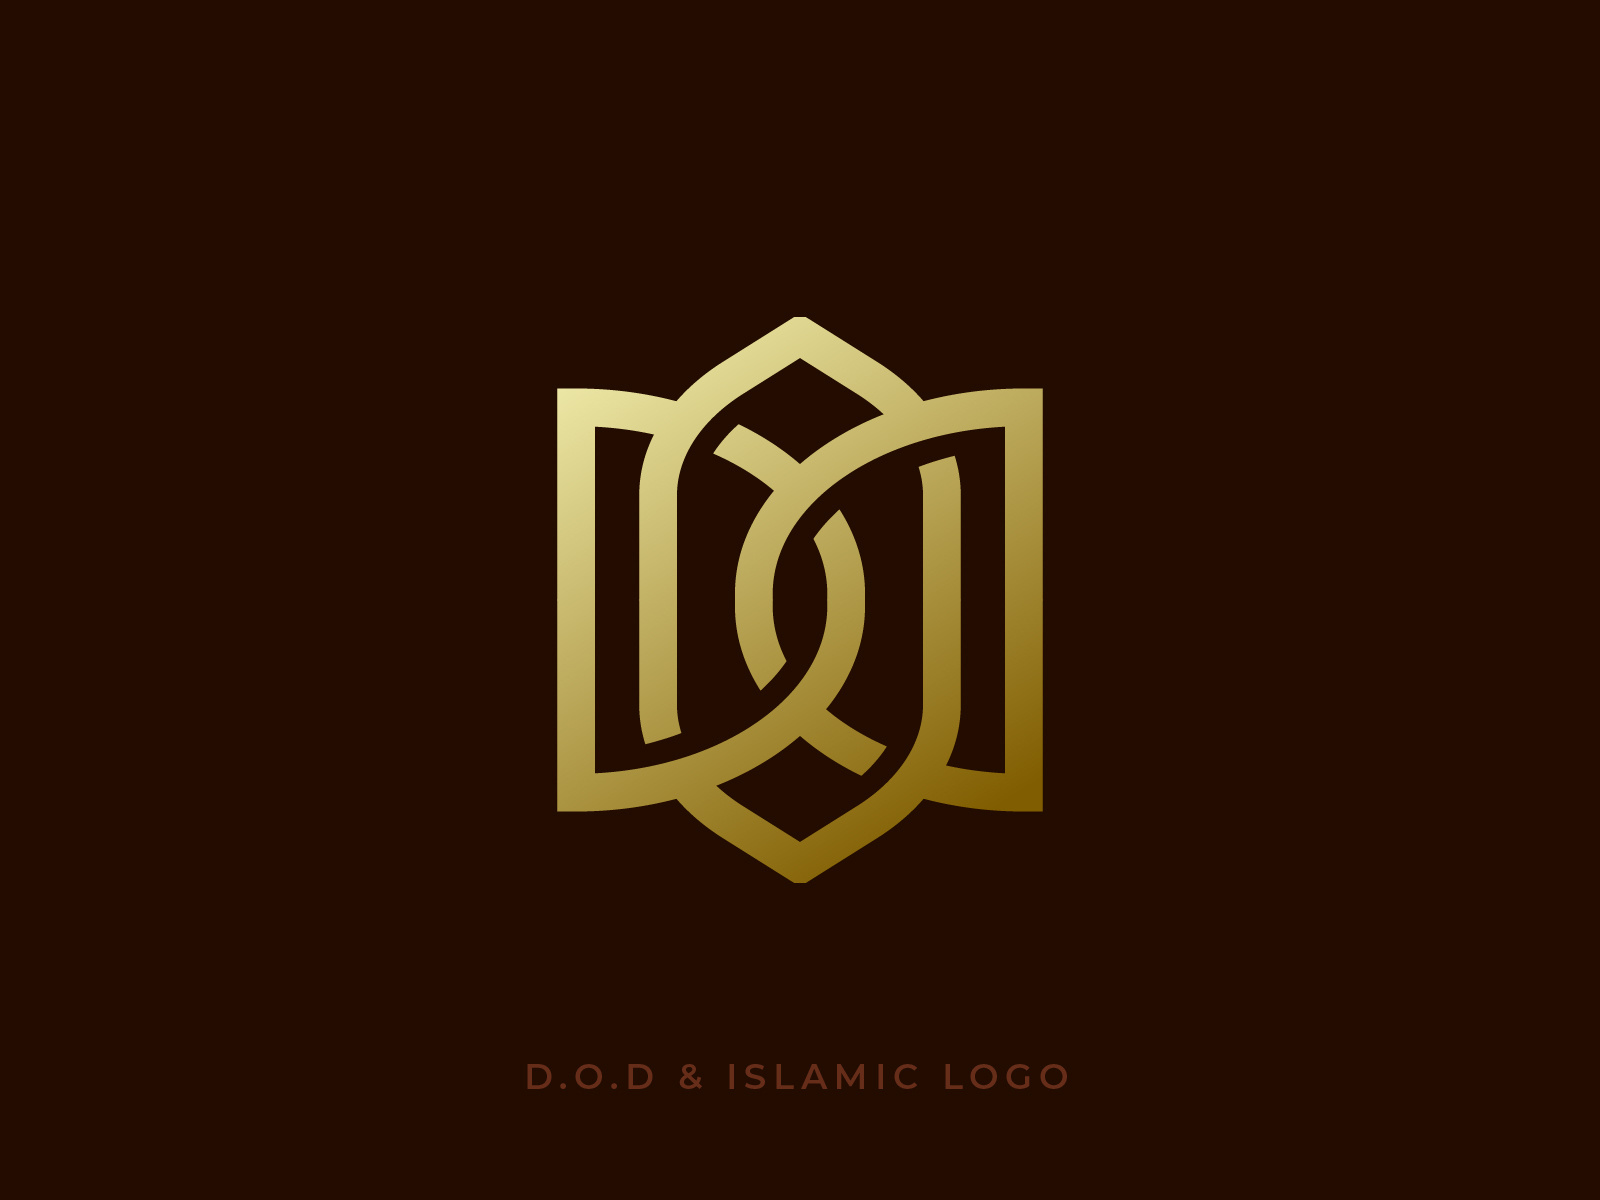 Initial D.O.D & Islamic Logo by Abuzayd on Dribbble